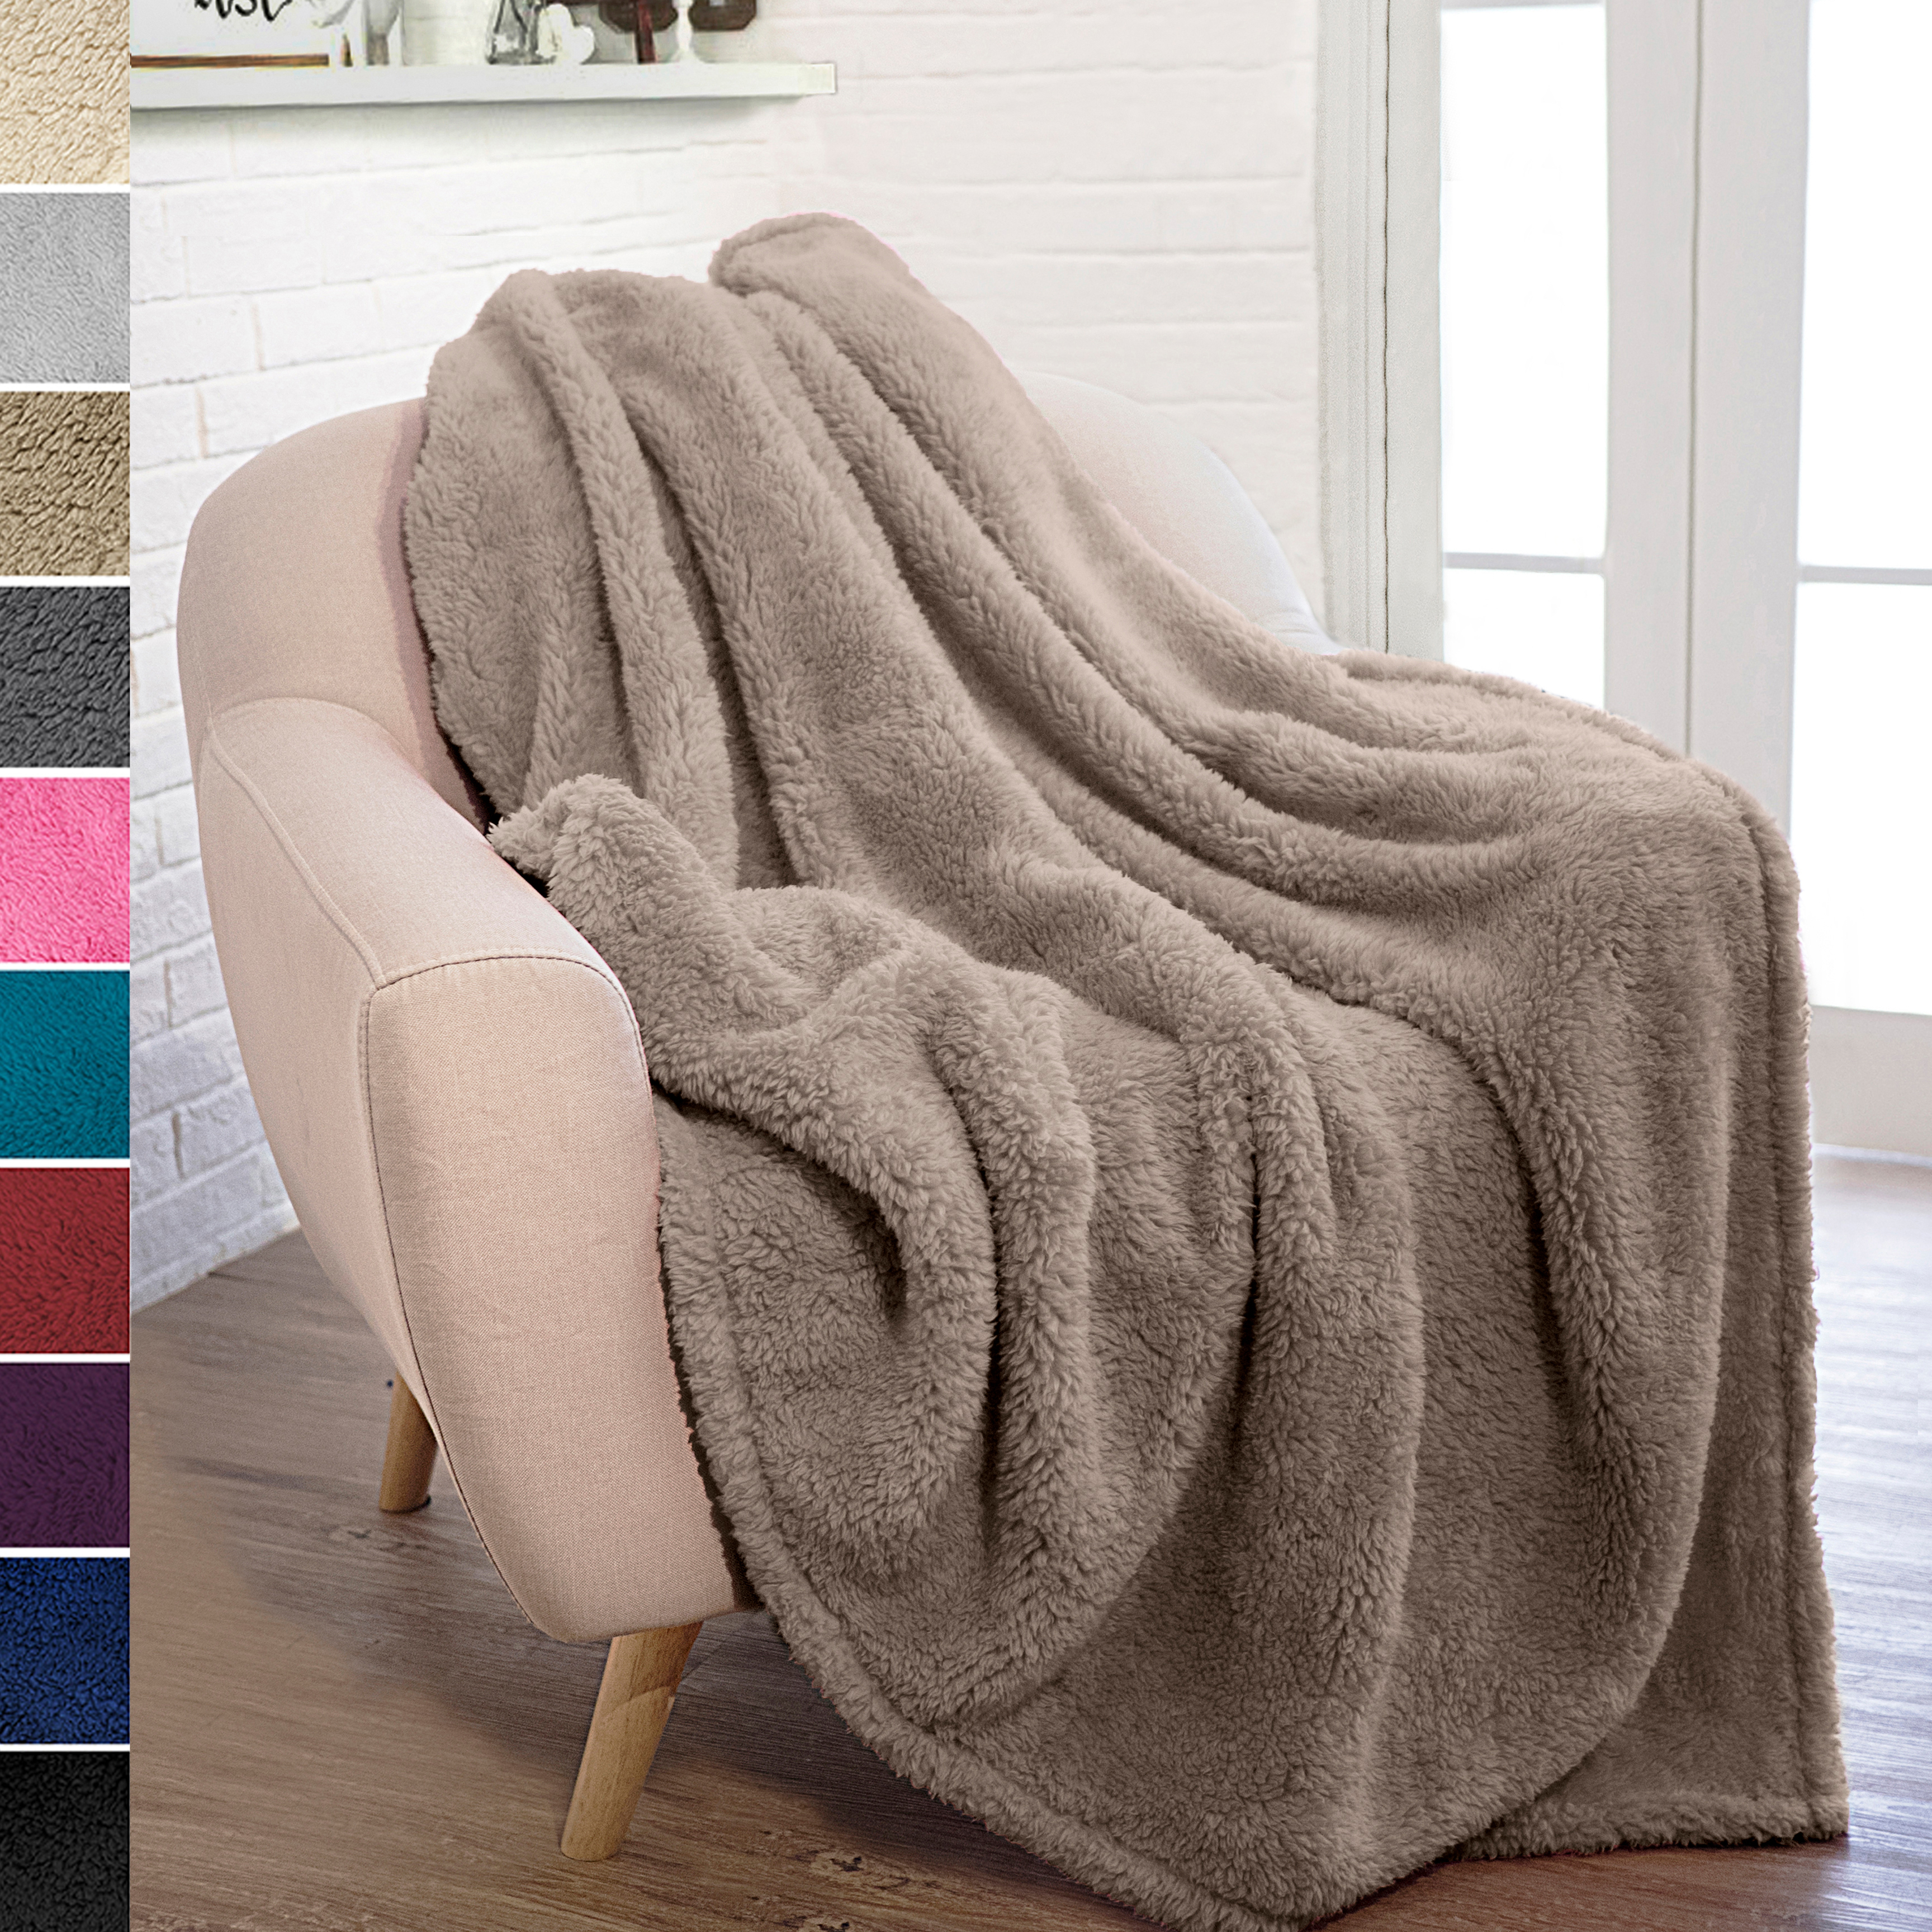 Soft Fuzzy Warm Cozy Throw Blanket with Fluffy Sherpa Fleece for Sofa Couch  Bed | eBay